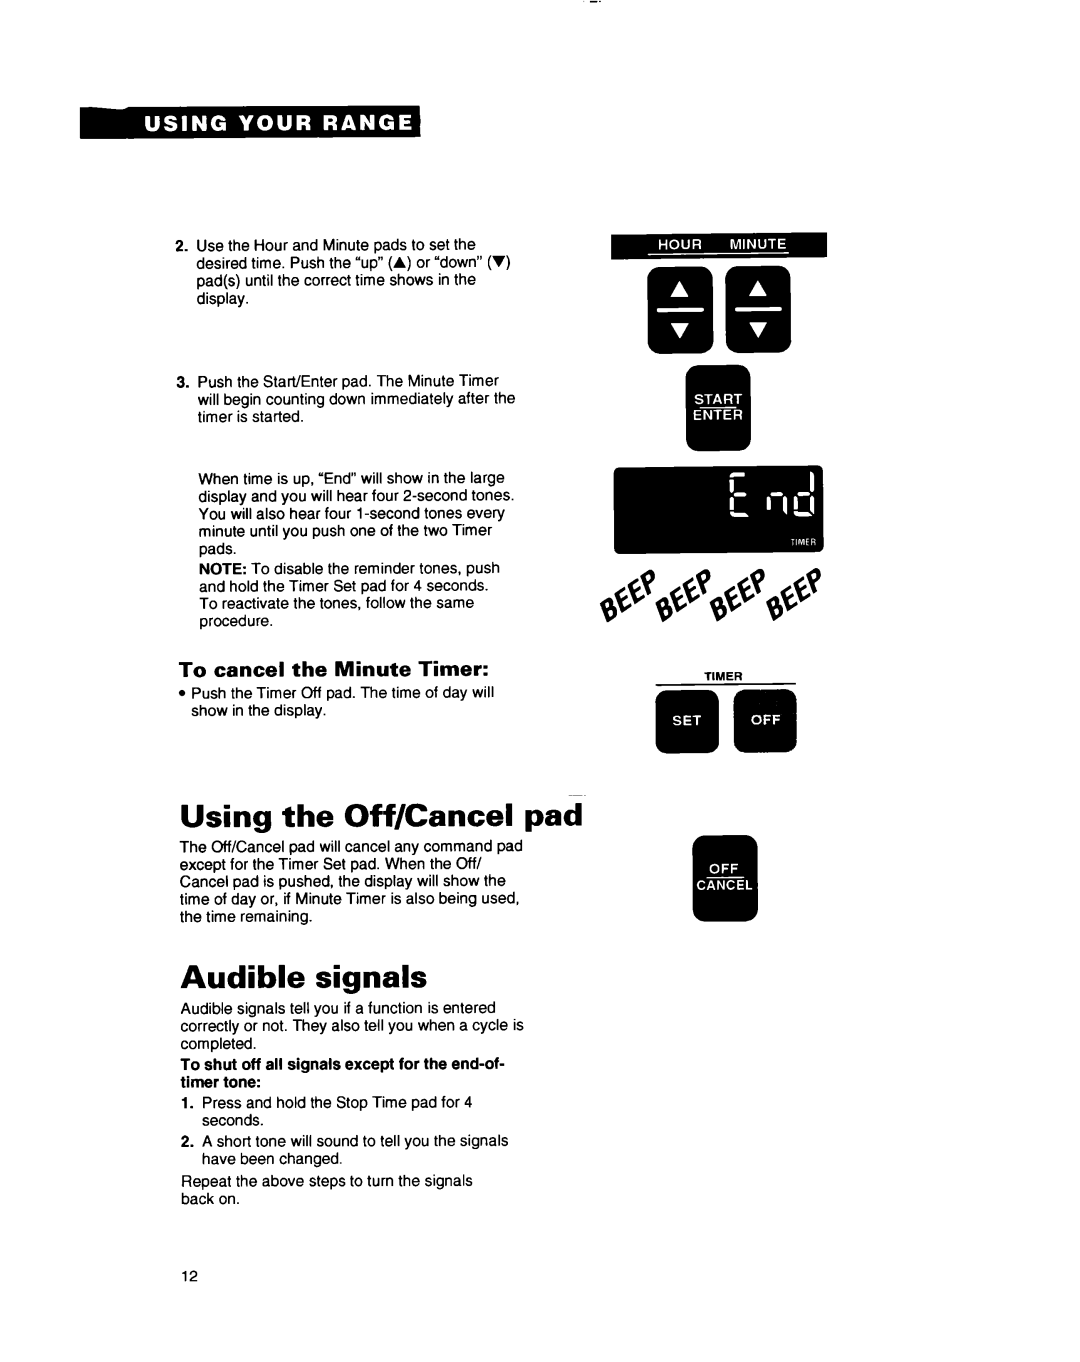 Whirlpool RF385PXY manual Using the Off/Cancel pad, Audible signals, To cancel the Minute Timer 